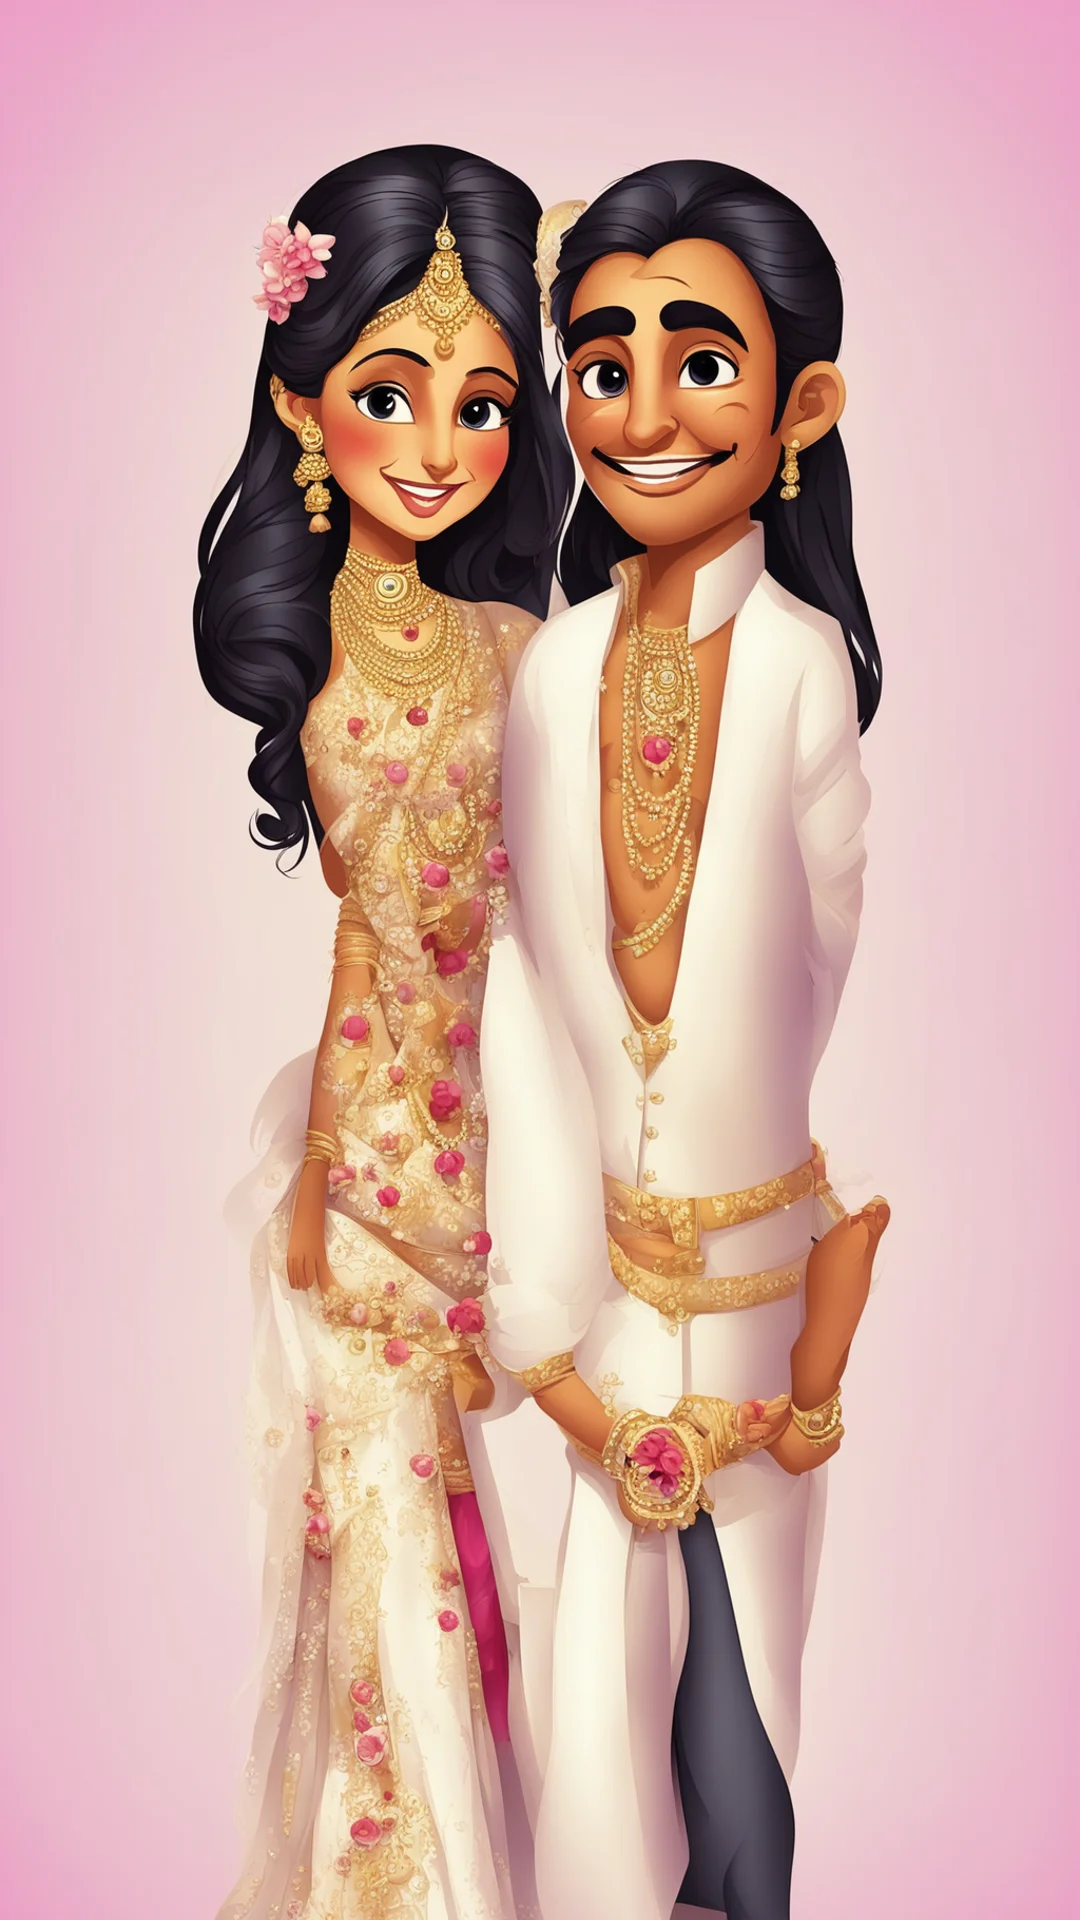 aibride and groom cute couple cartoon characters indian amazing awesome portrait 2 tall